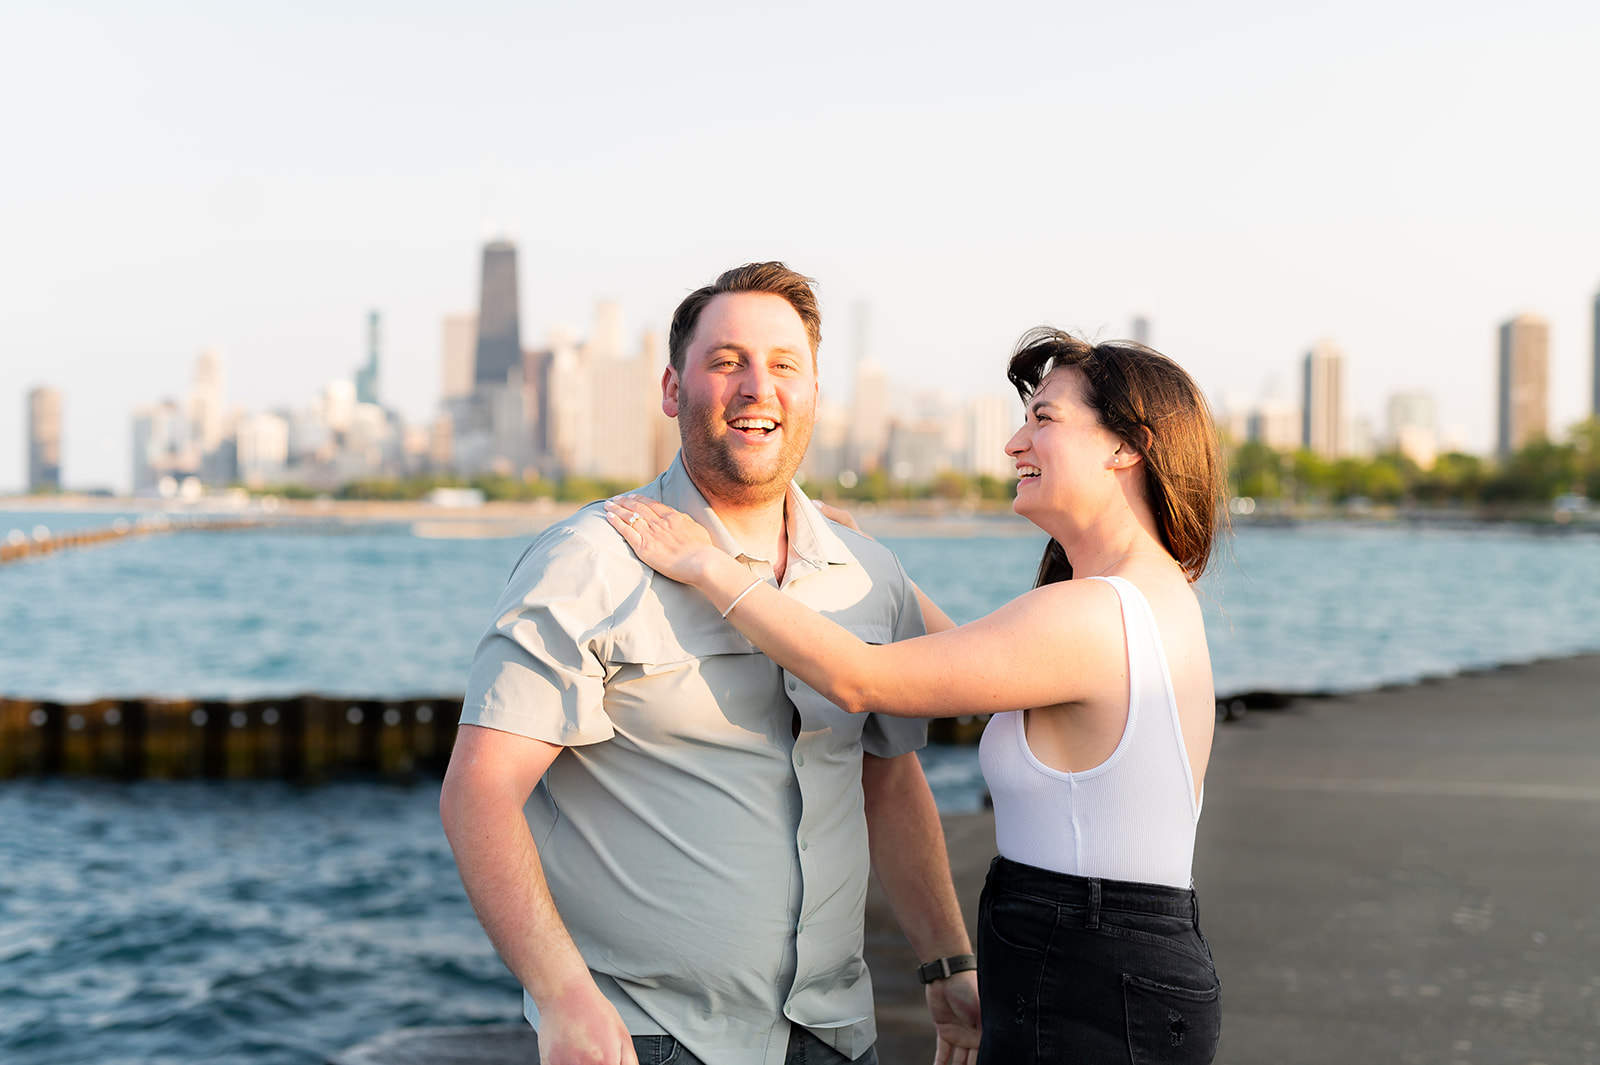 Theater On the Lake Engagement Session